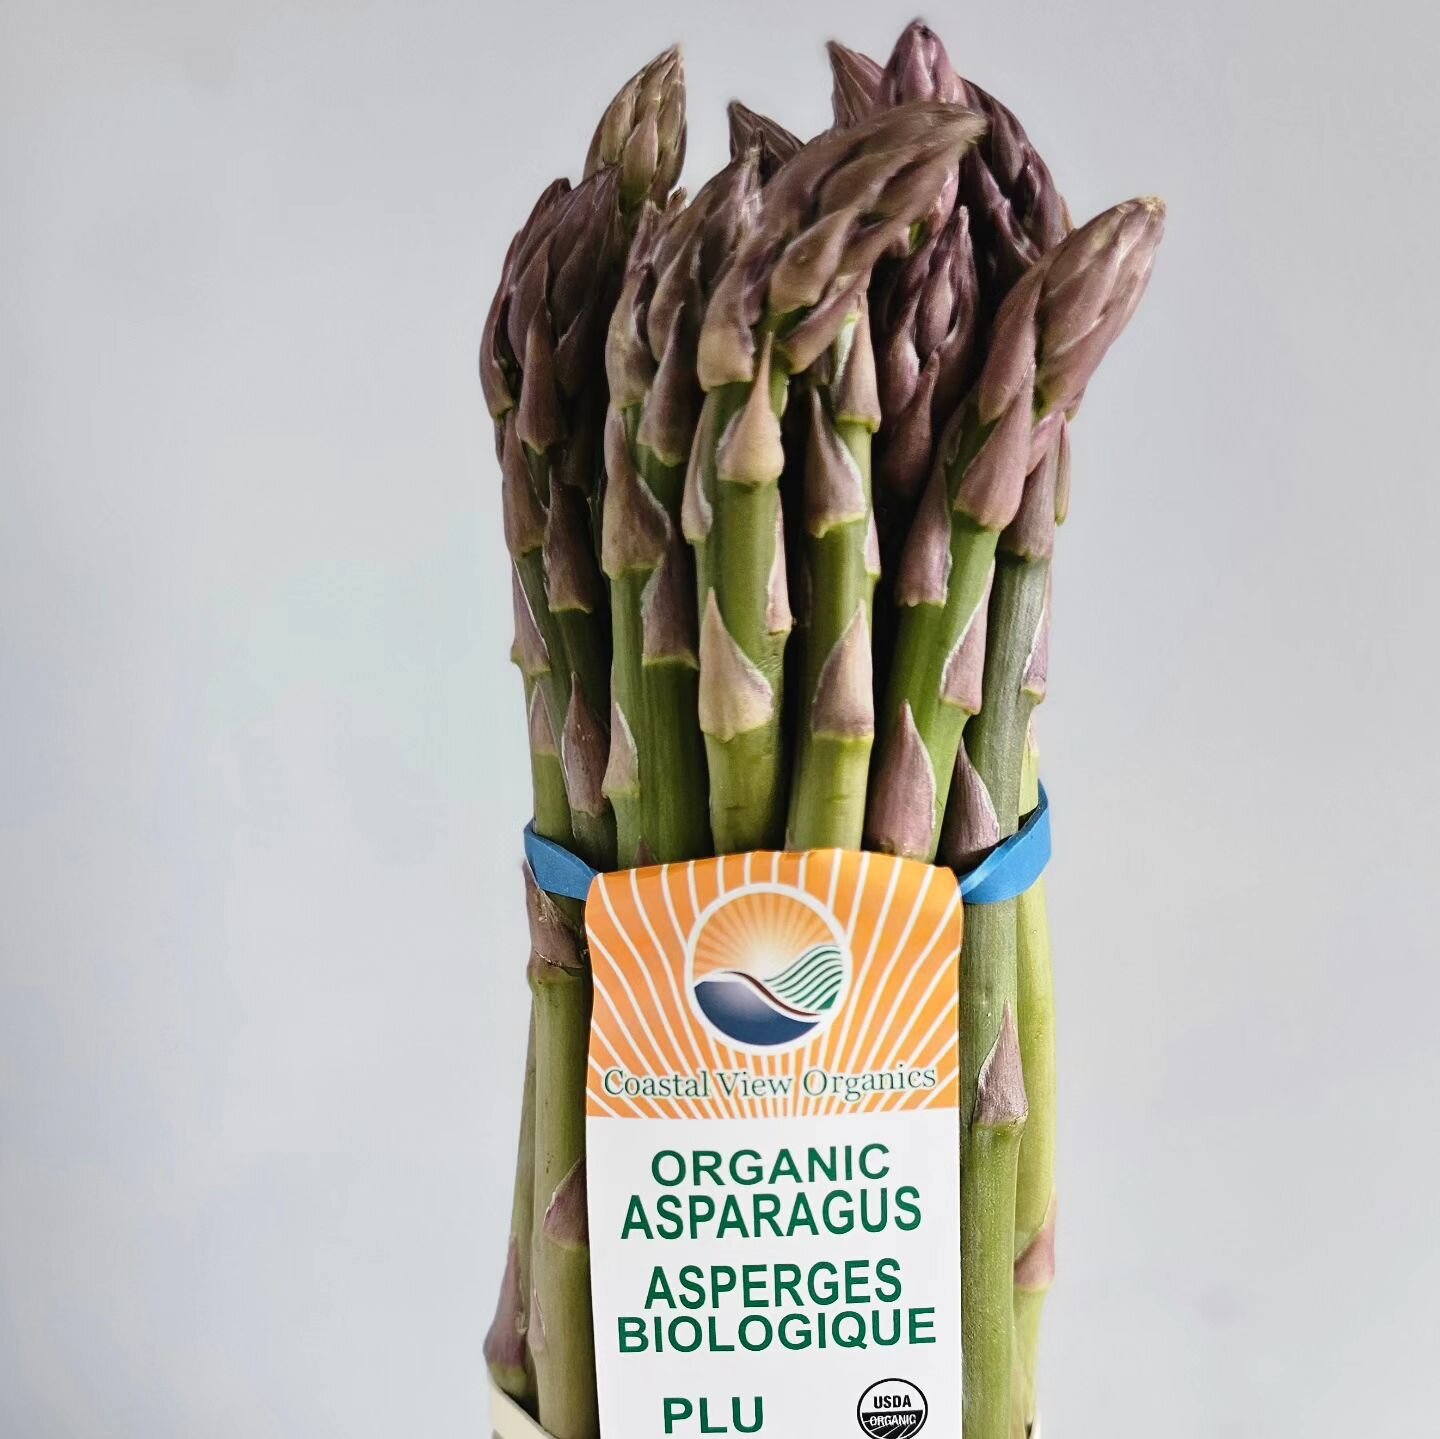 California Coastal View Produce Organic Asparagus is a harbinger of spring. For almost 40 years Coastal View Produce has been growing high-quality organic asparagus in the heart of the Salinas Valley. The Mediterranean climate and fertile soil make i